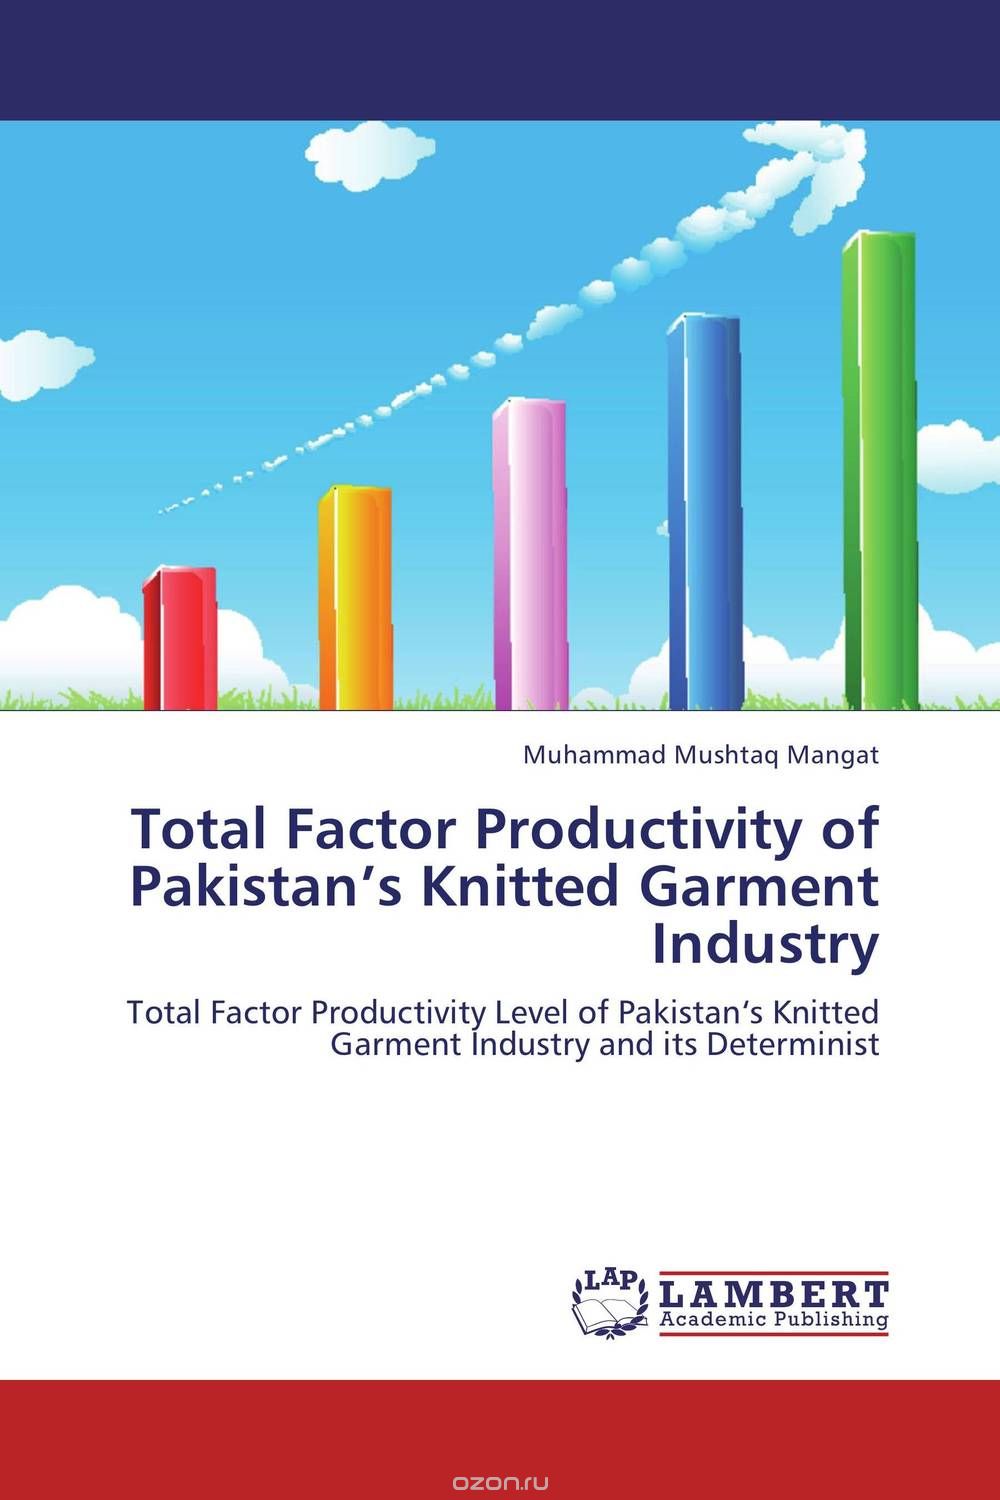 Total Factor Productivity of Pakistan’s Knitted Garment Industry